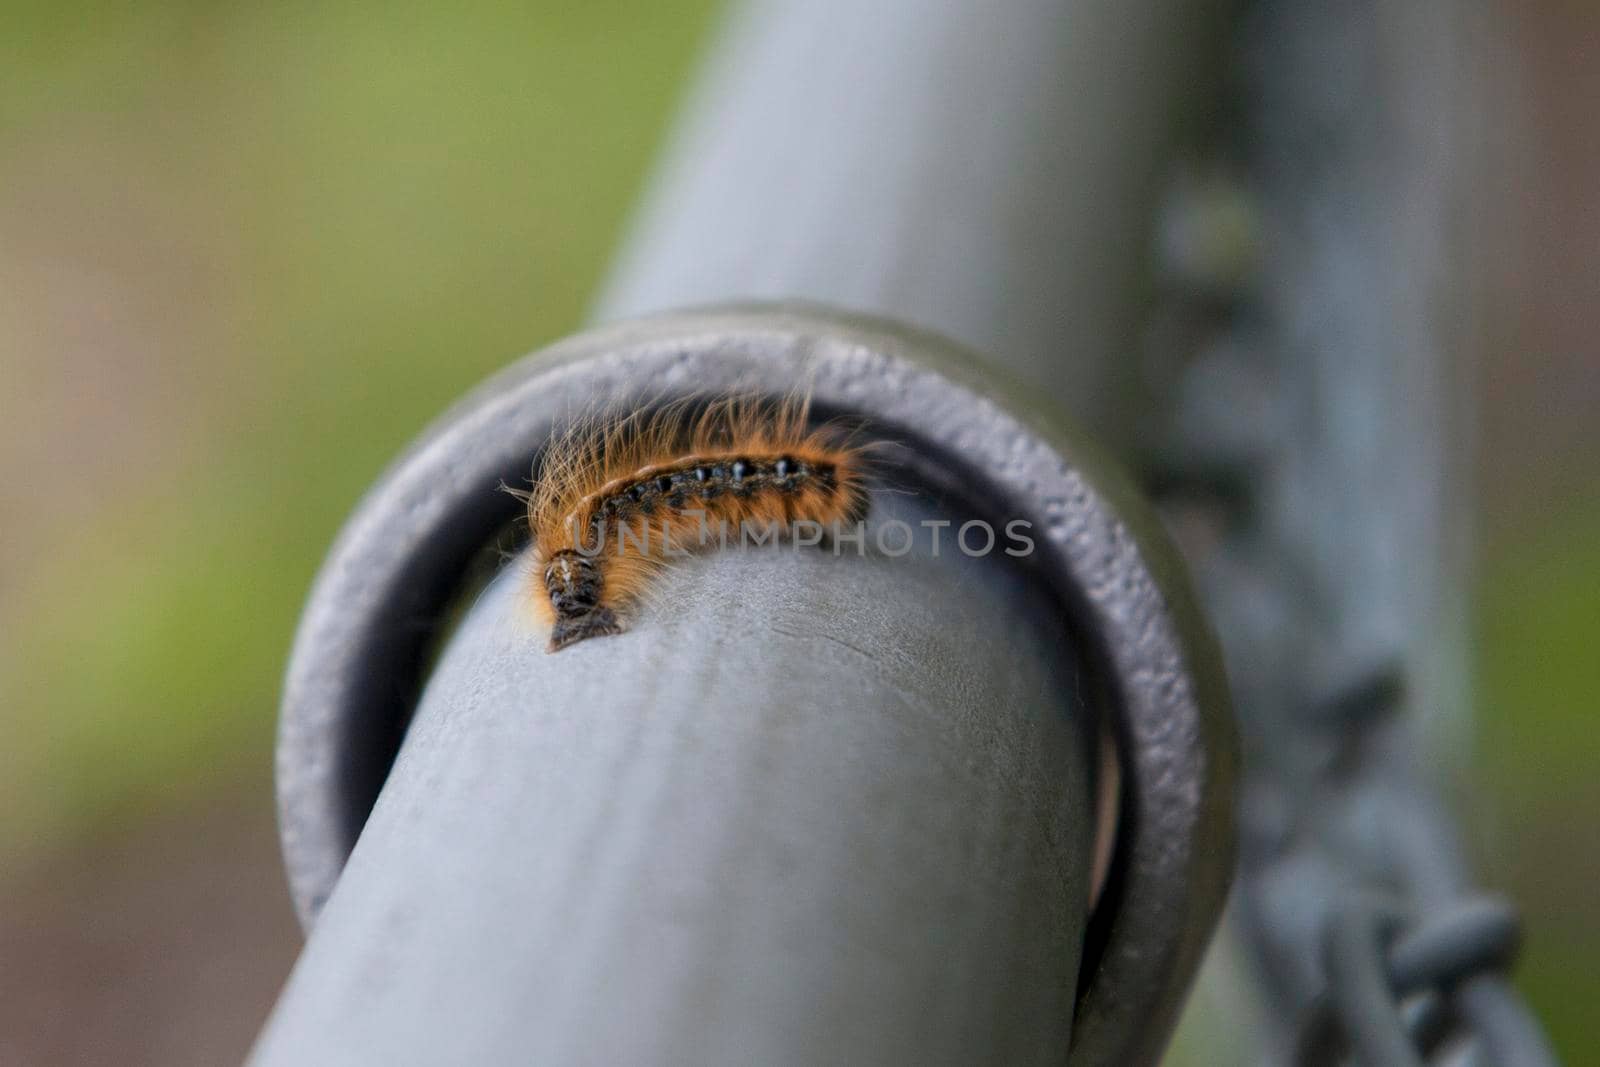  A fuzzy brown and black caterpillar curls around and slinks along a metal fence 